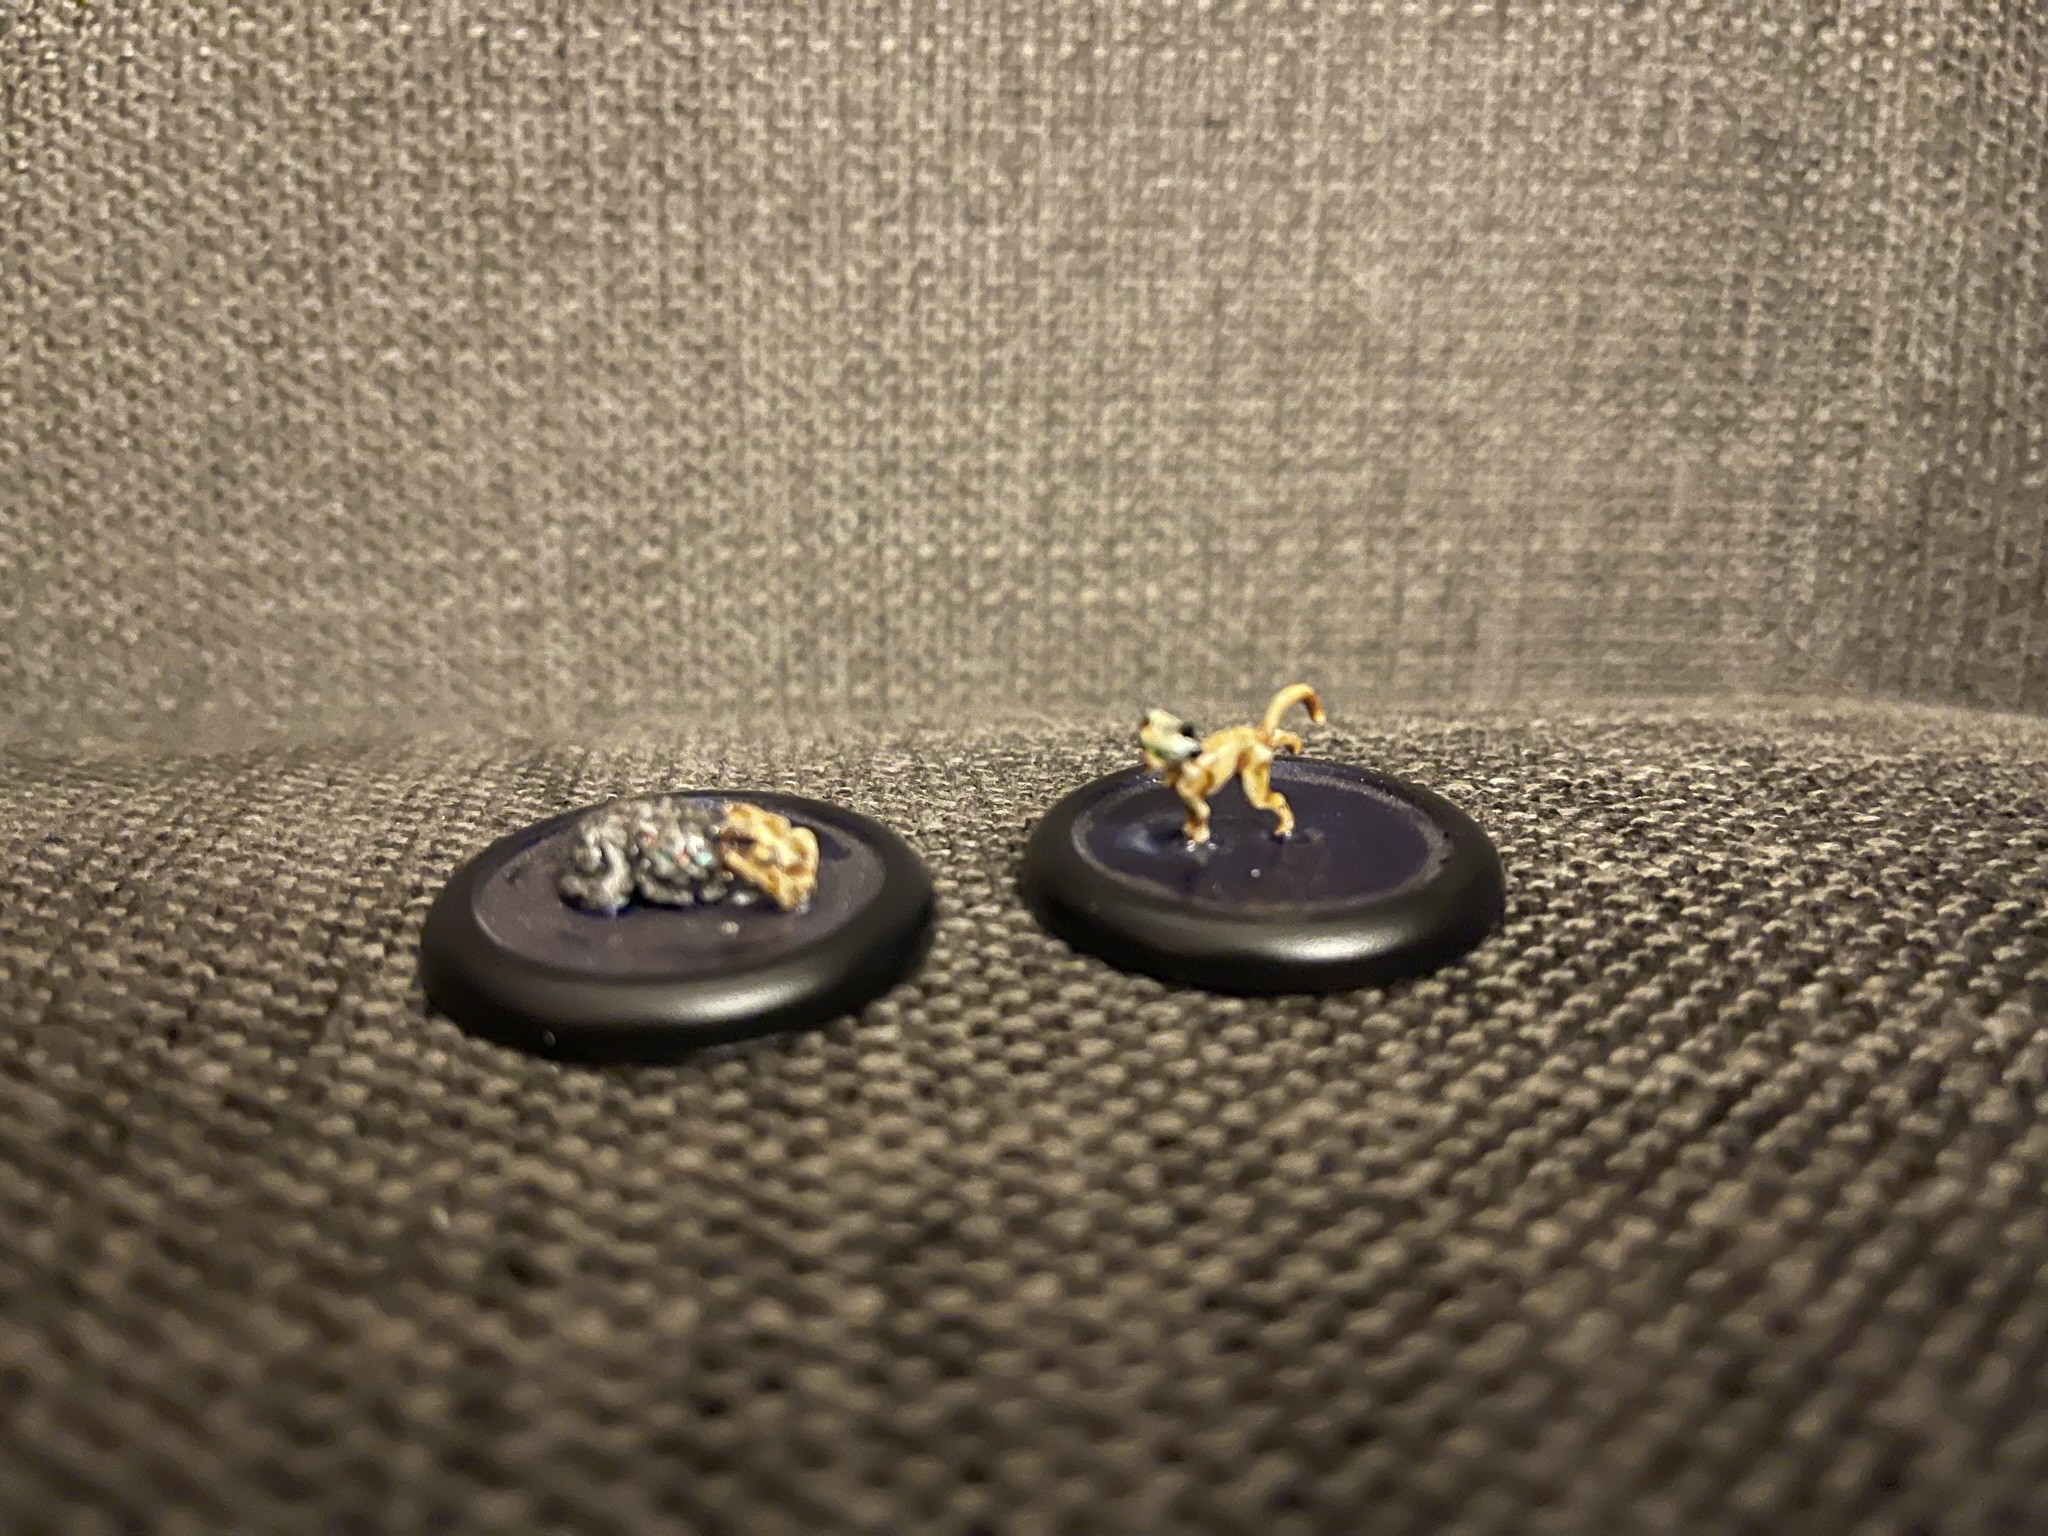 Outcasts – Cats [Malifaux]